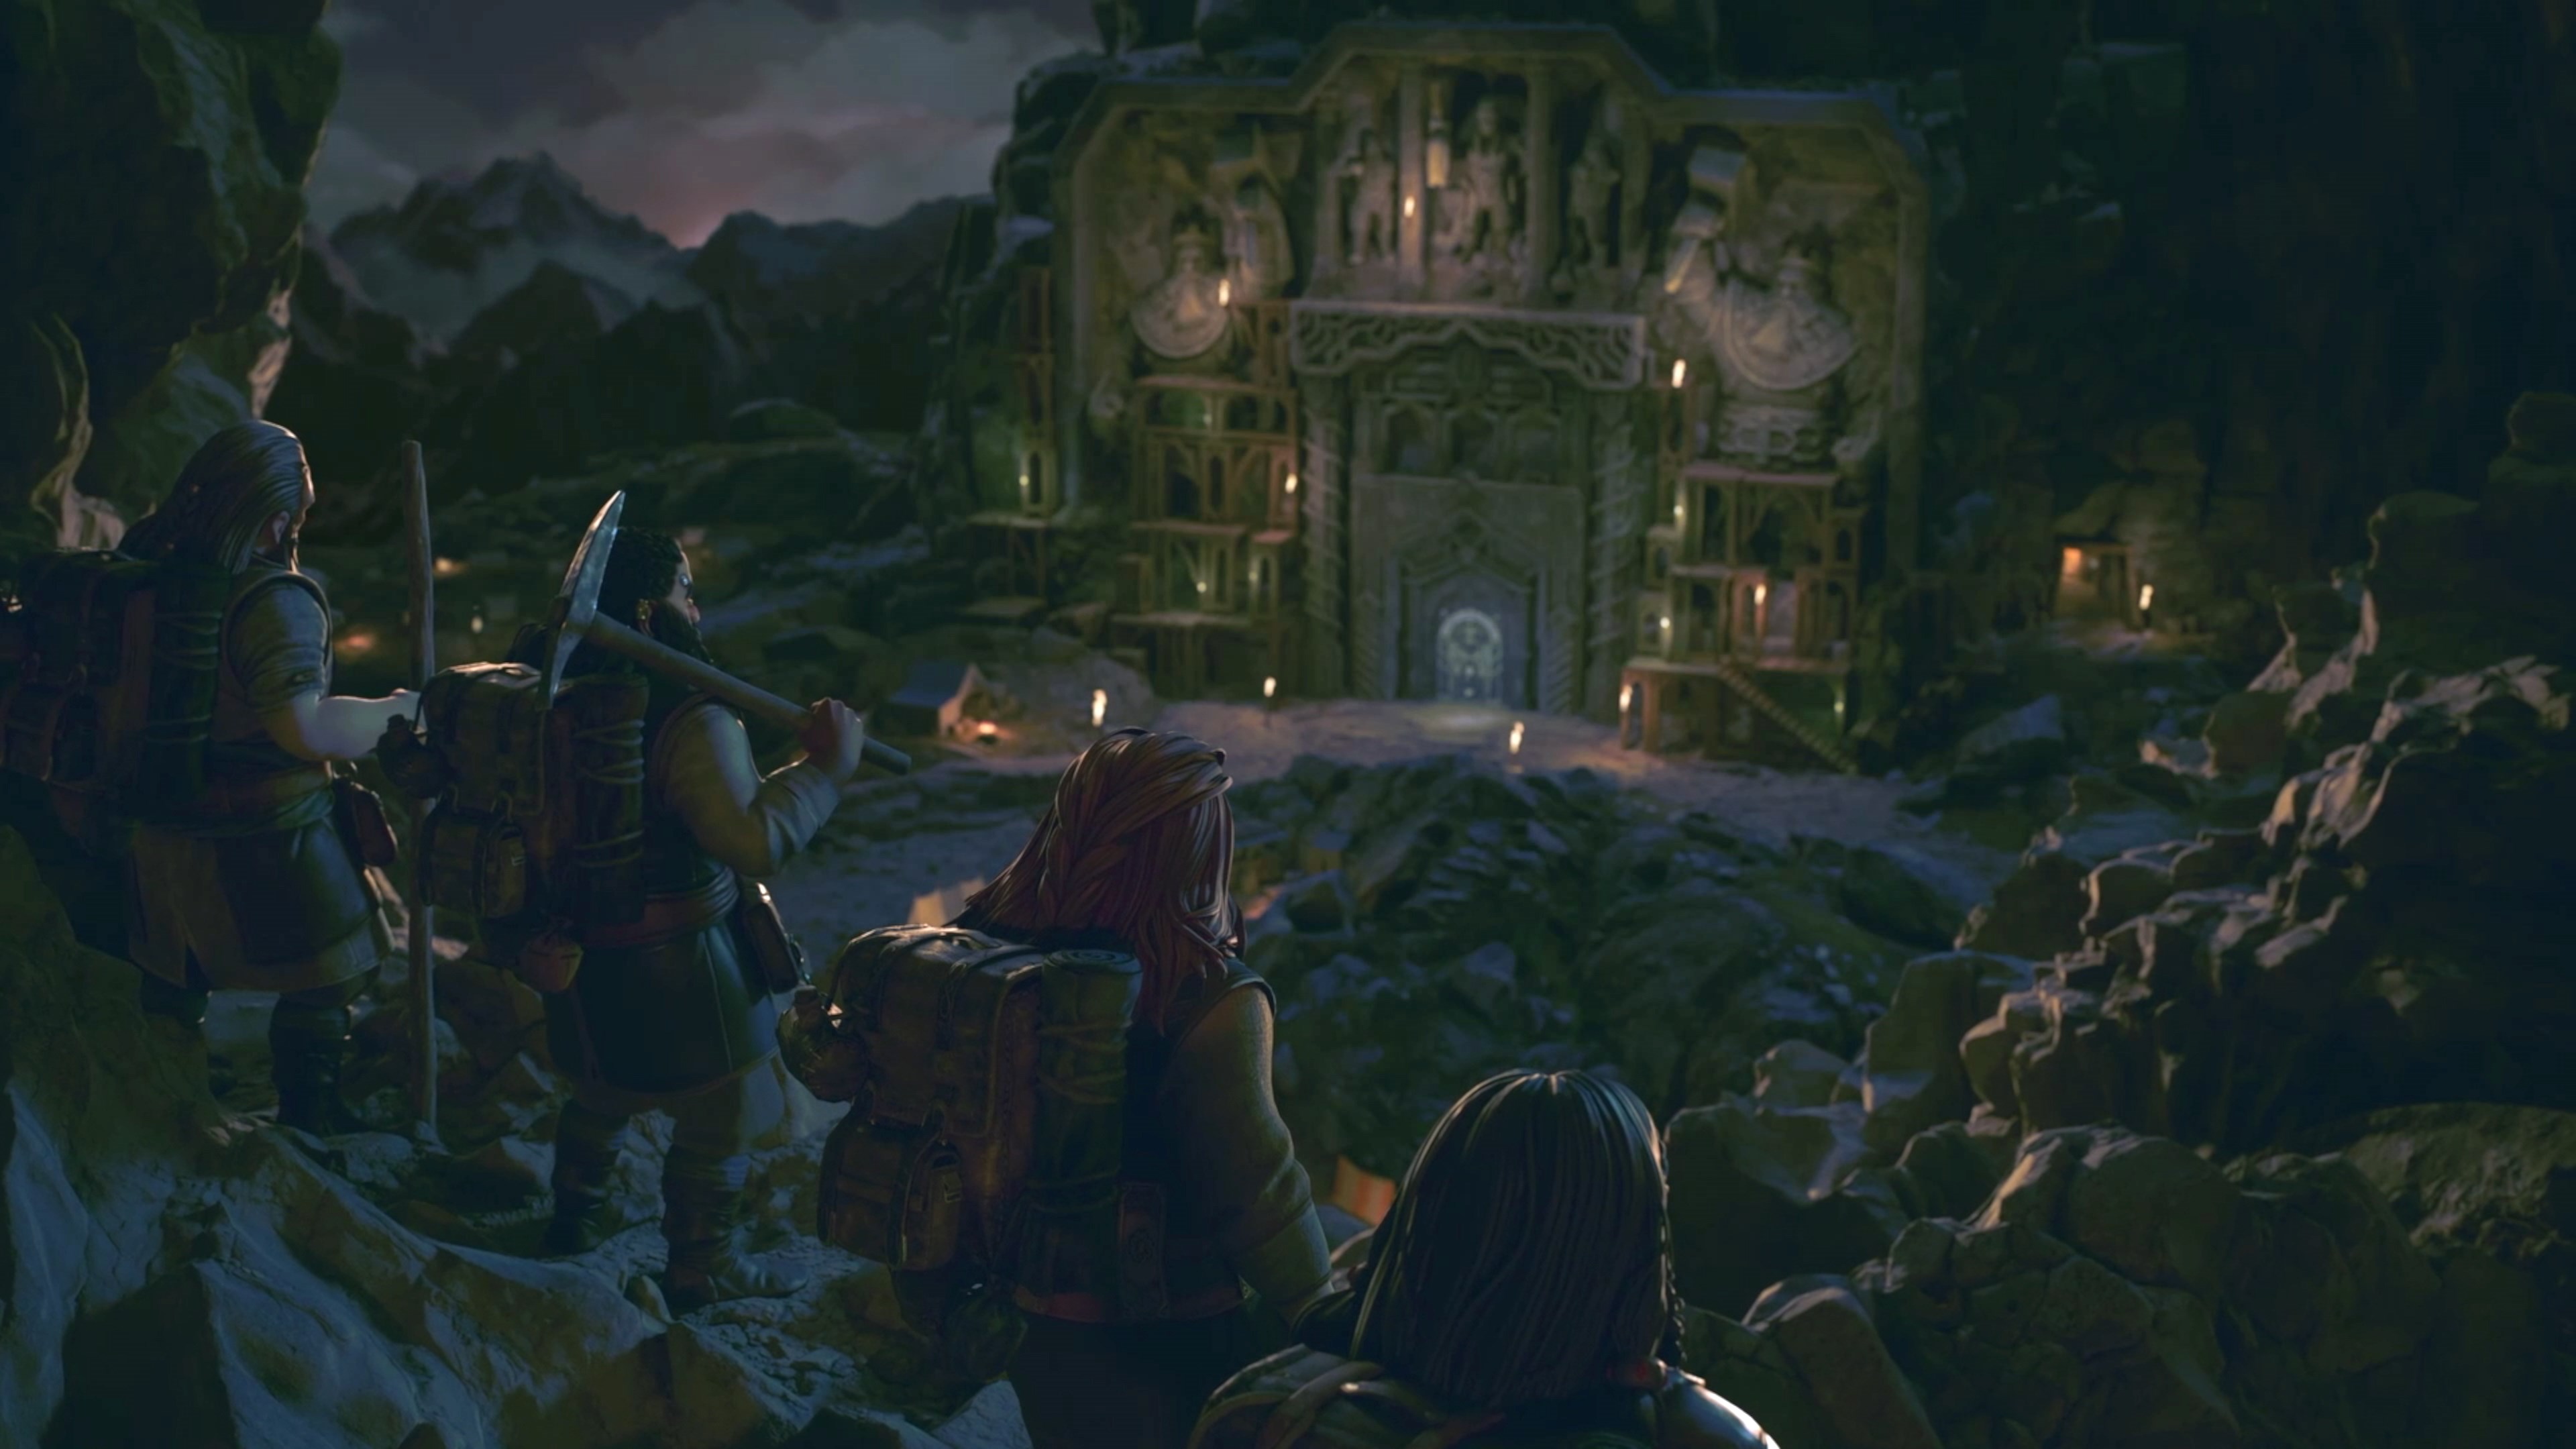 The Lord of the Rings: Return to Moria Is a 4th Age Co-Op Survival Game